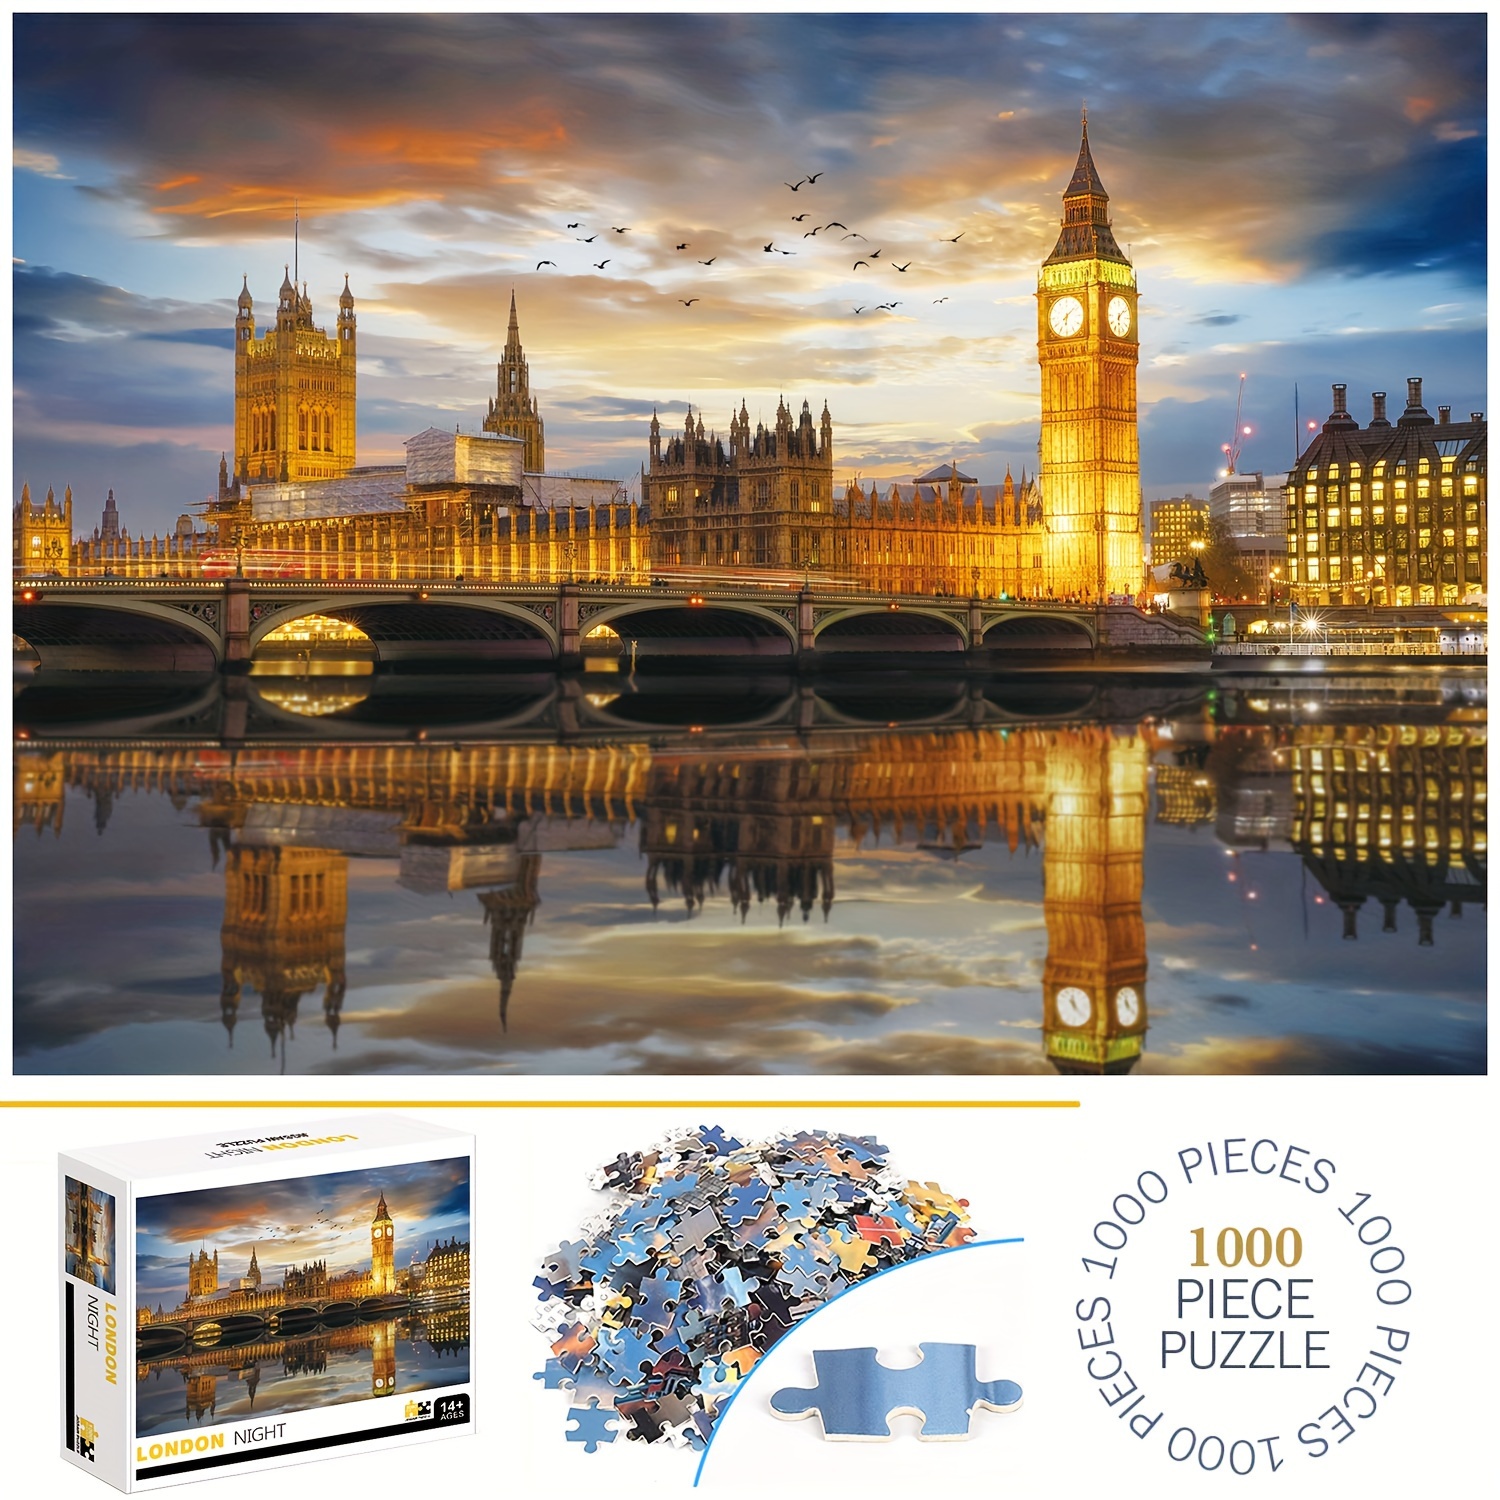 

1000pcs London Night Puzzles, Thick And Durable Seamless Jigsaw Puzzles For Adults Fun Family Challenging Puzzles For Birthday, Christmas, Halloween, Thanksgiving, Easter